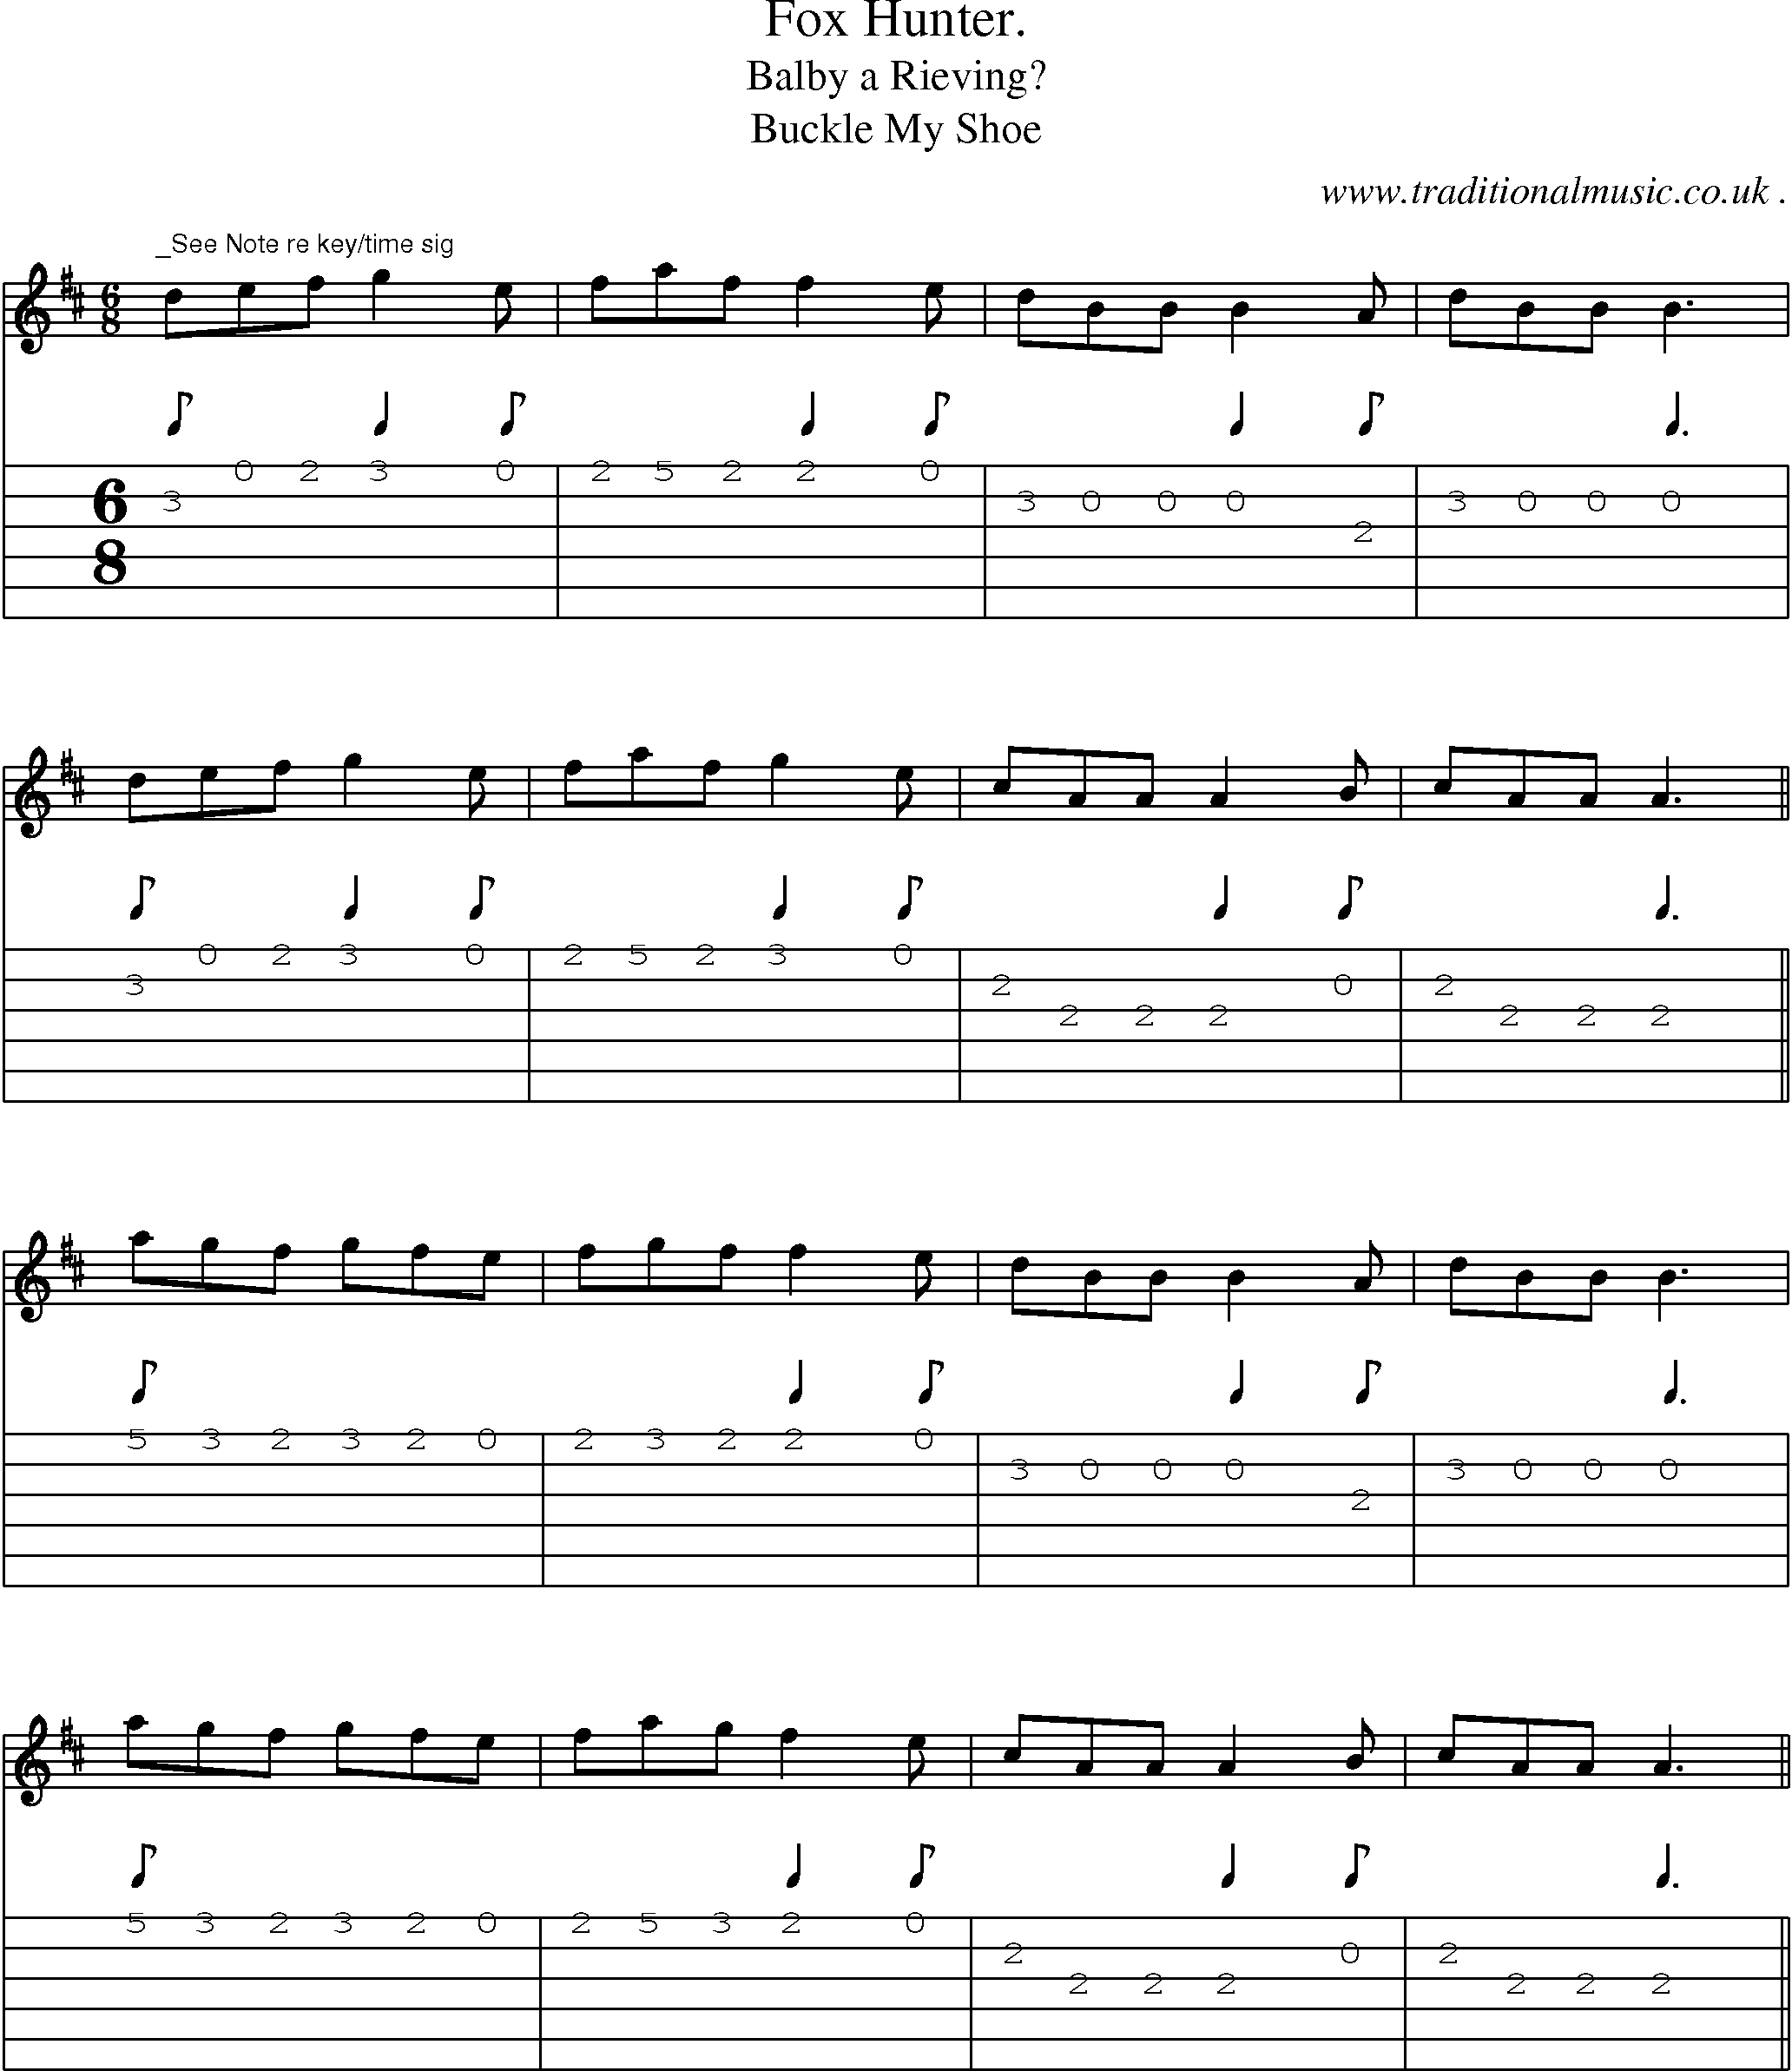 Sheet-Music and Guitar Tabs for Fox Hunter